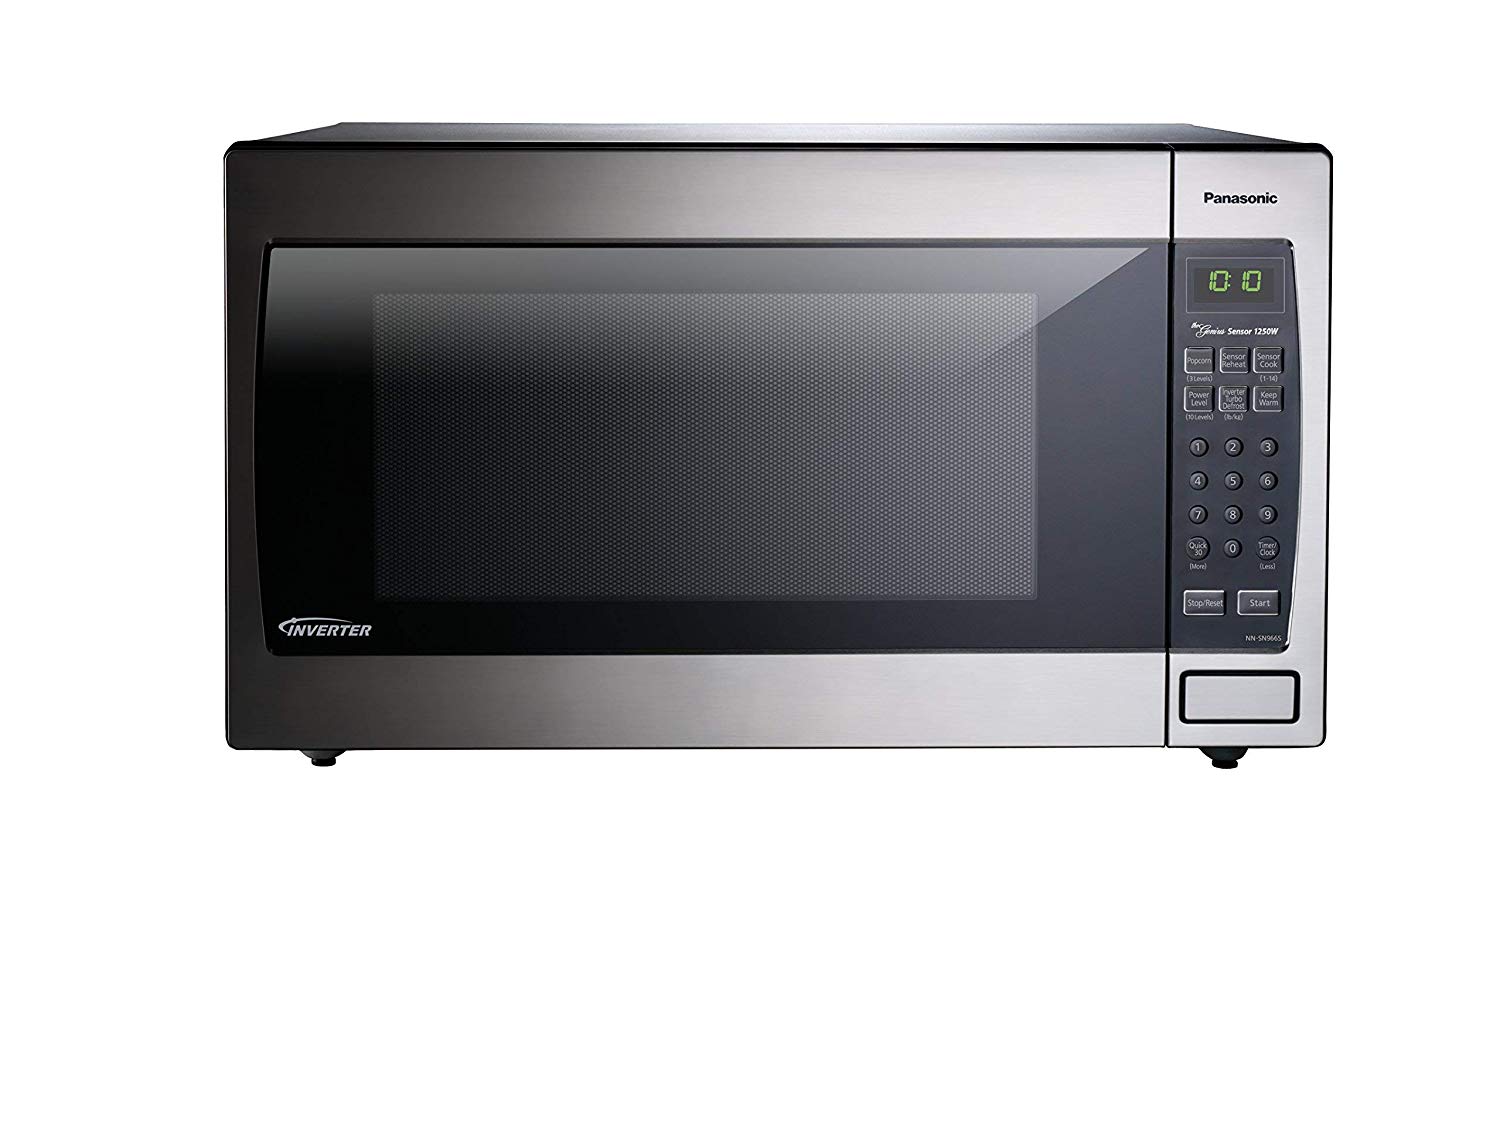 Panasonic Countertop Microwave Oven NN-SN966S Stainless Steel with Inverter Technology